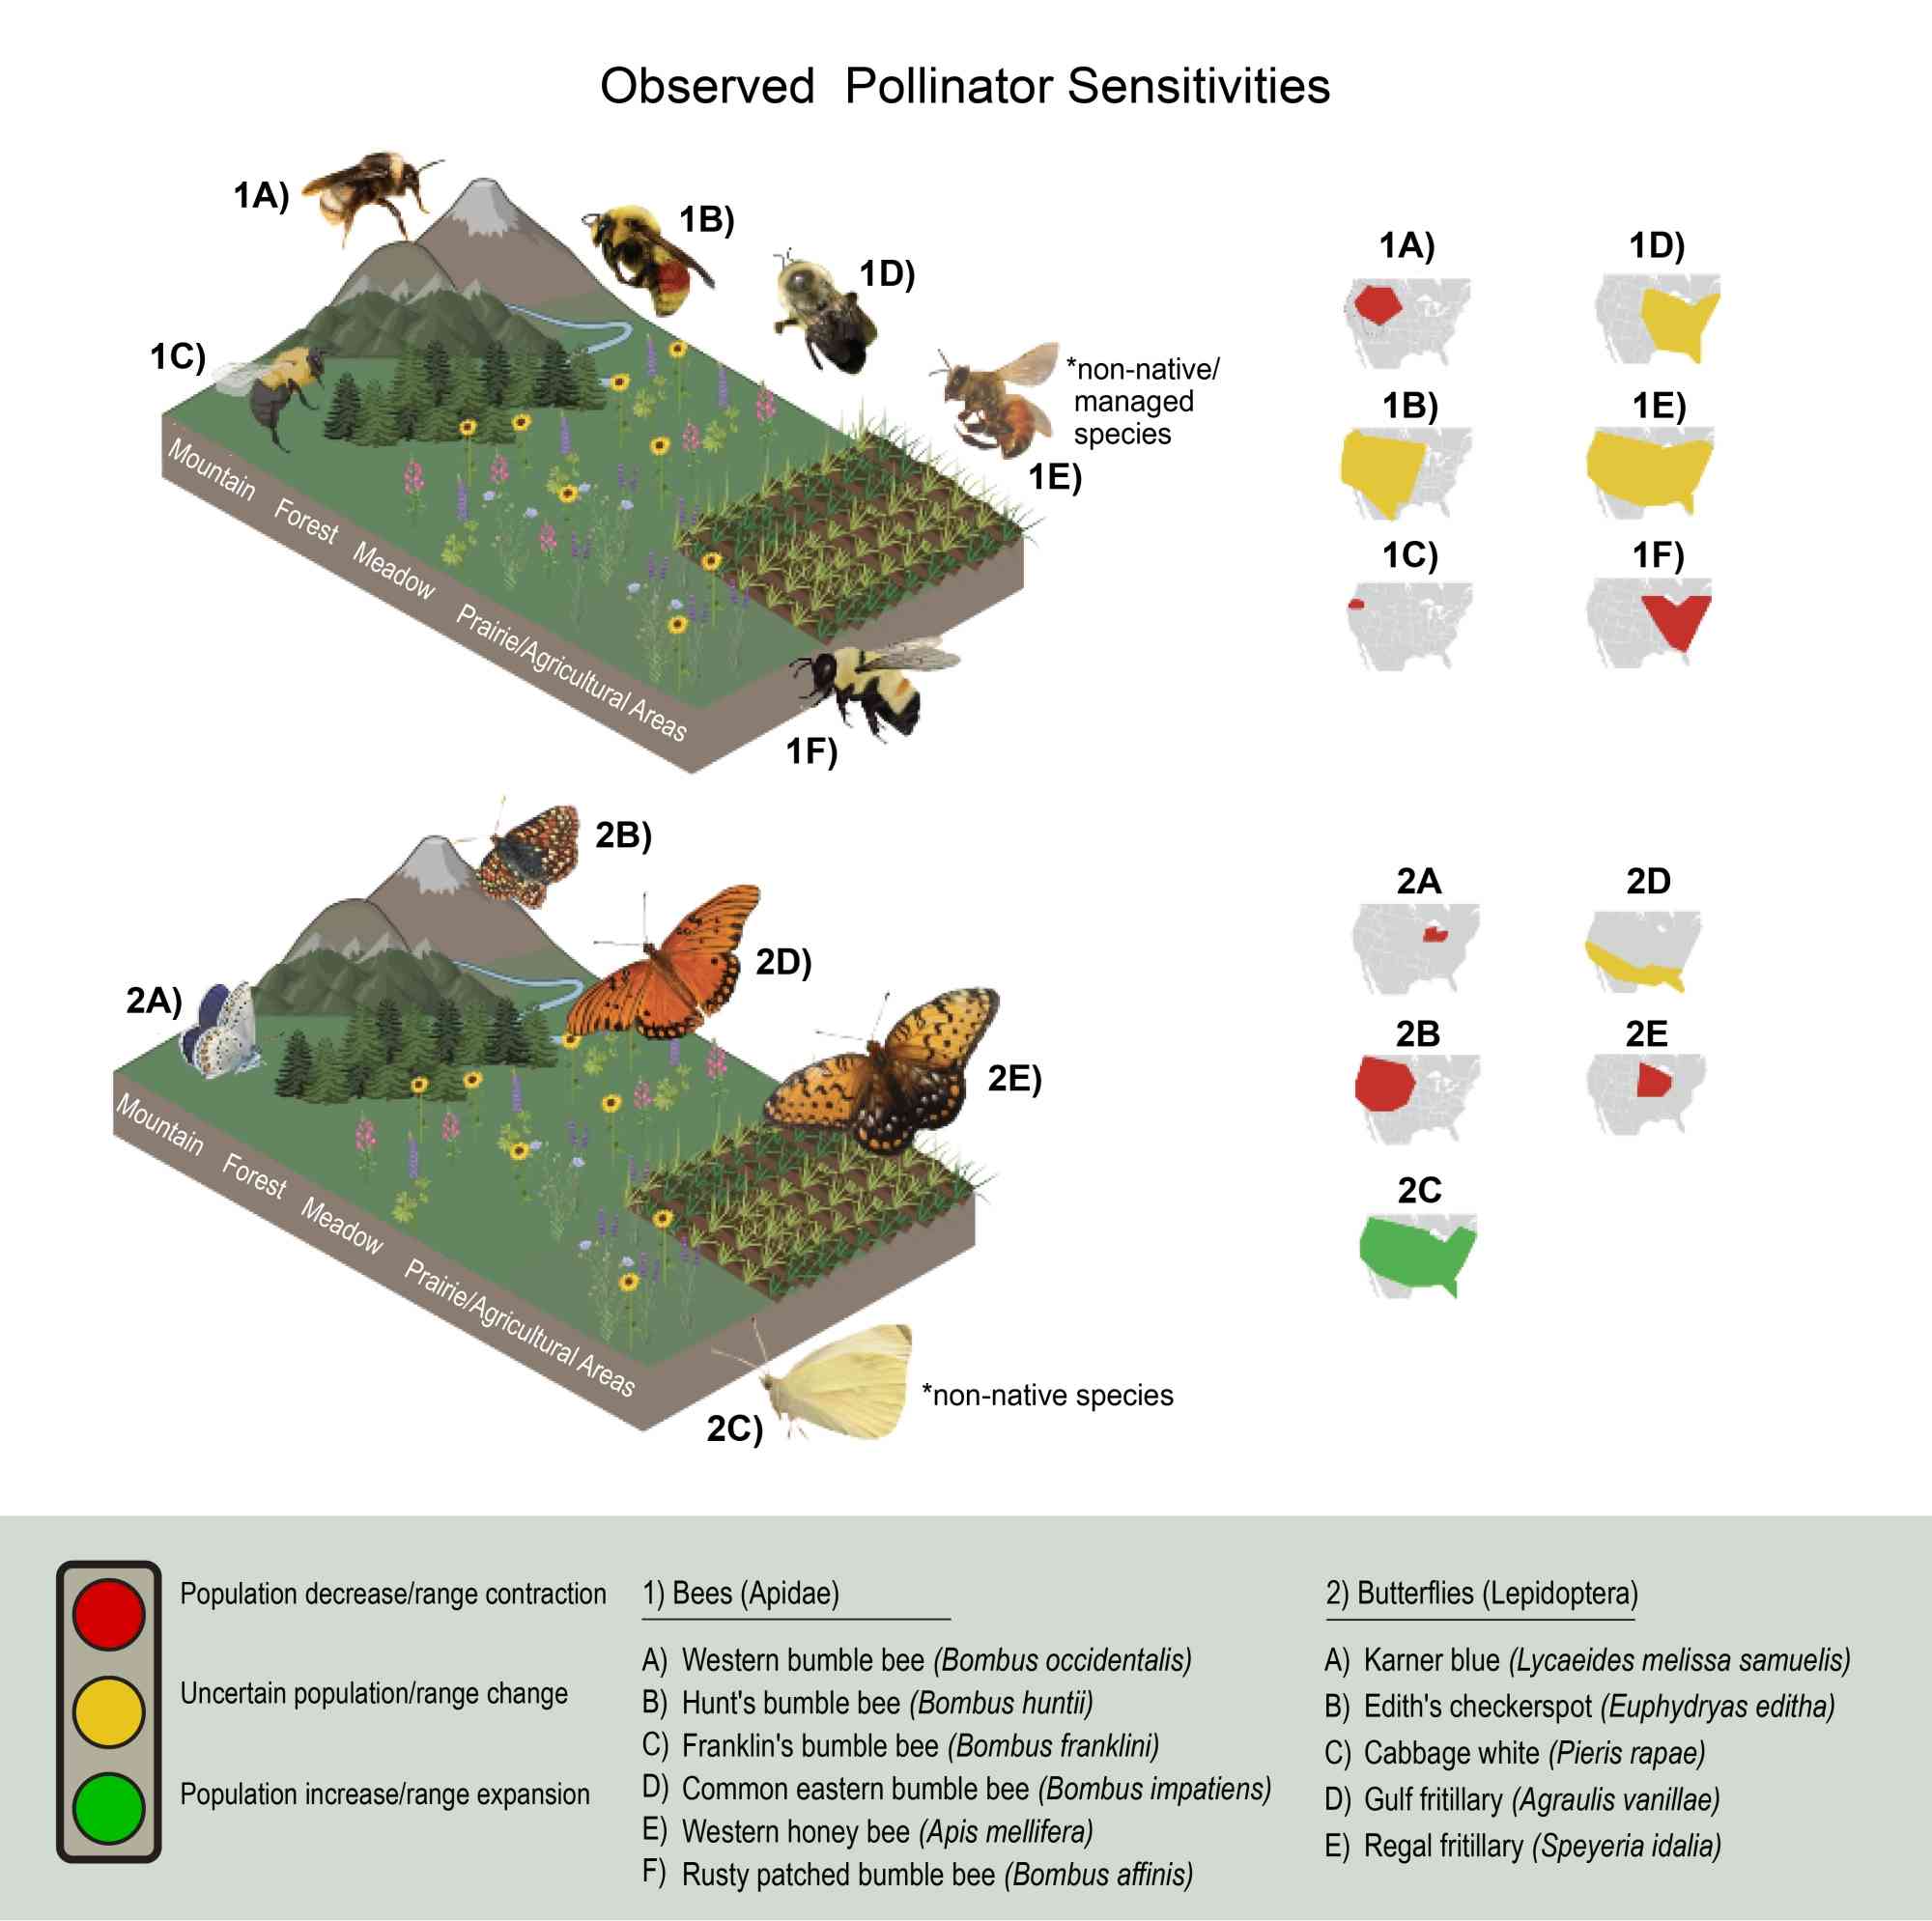 2024.01.11-Observed Pollinator Sensitivities-Crimmins, A.R., C.W. Avery, D.R. Easterling, K.E. Kunkel, B.C. Stewart, and T.K. Maycock, Eds. U.S. Global Change Research Program